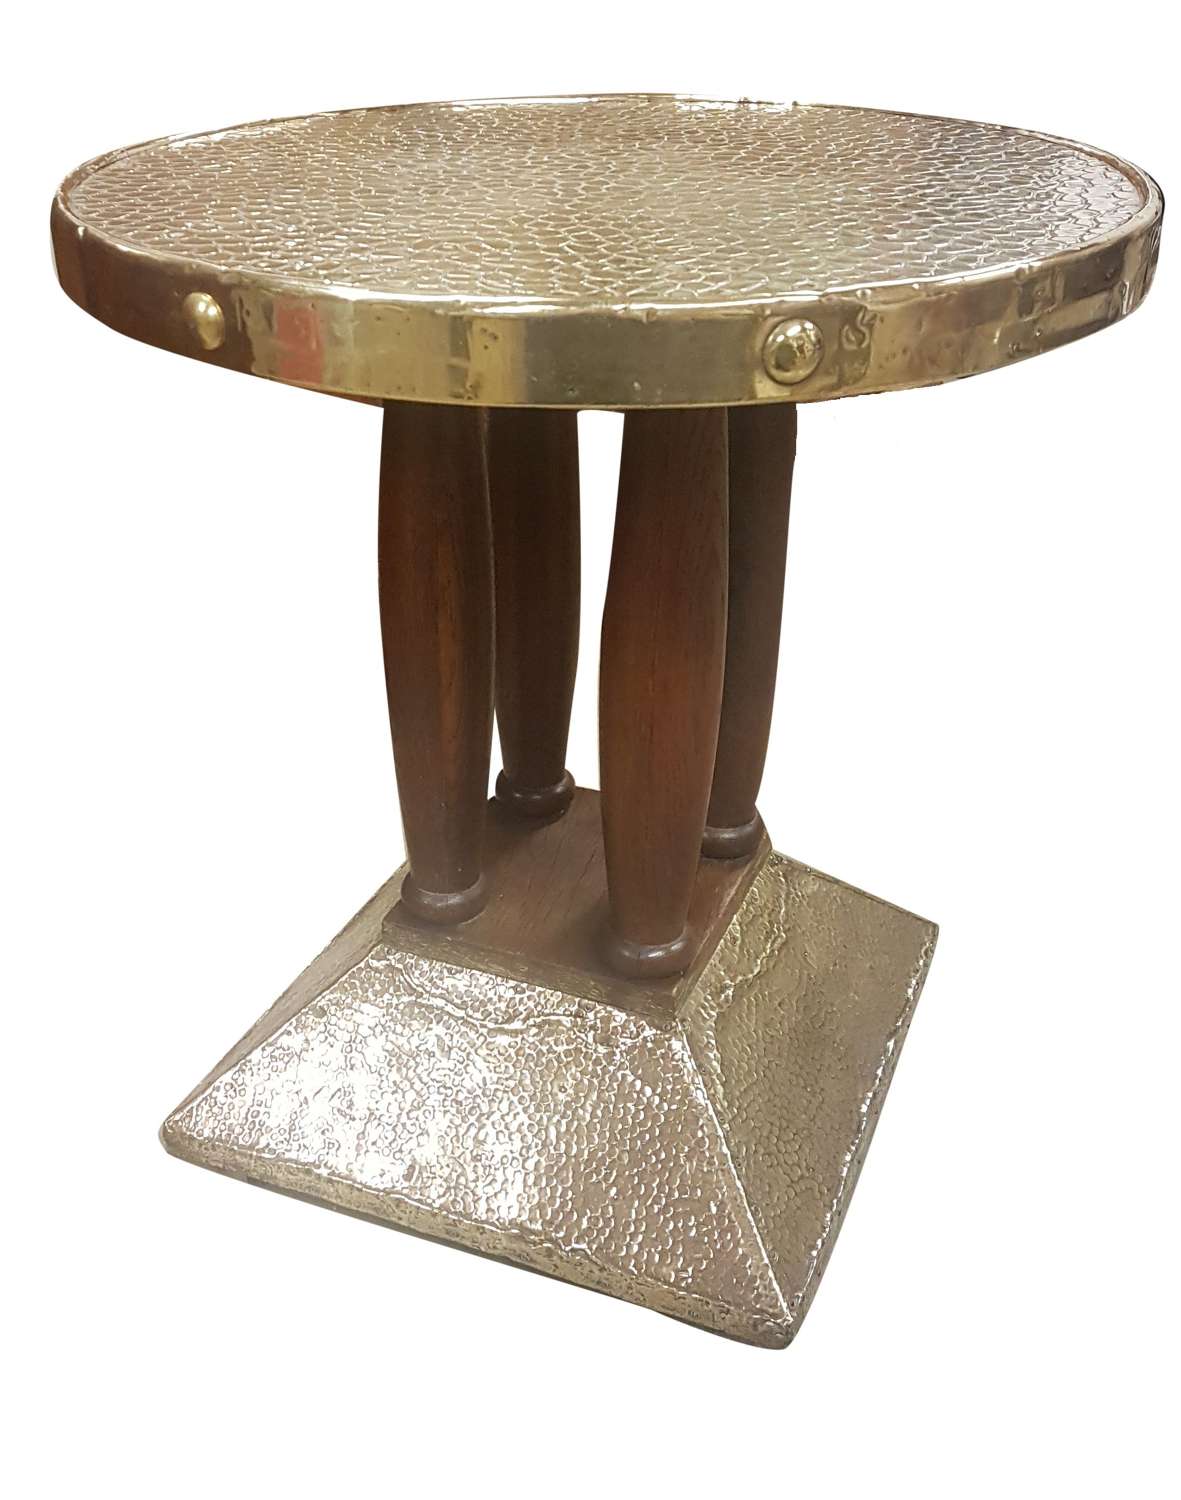 Oak and brass secessionist table in the manner of Josef Hoffmann